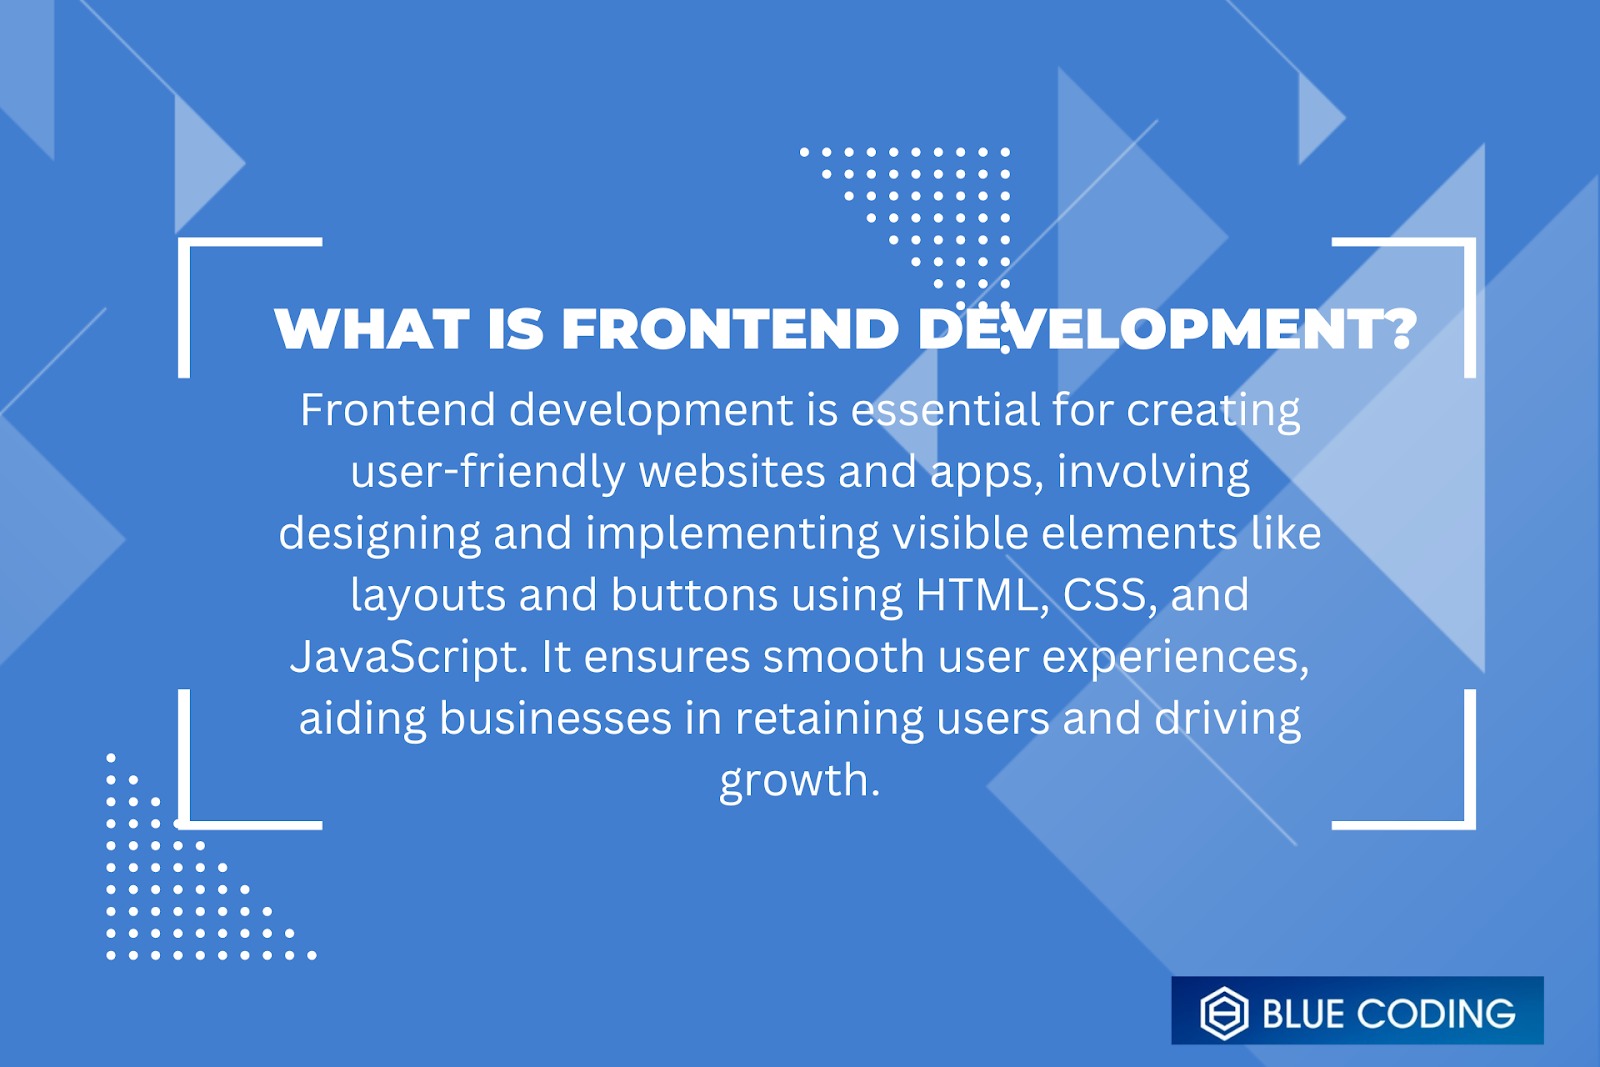 explanation of what frontend development is